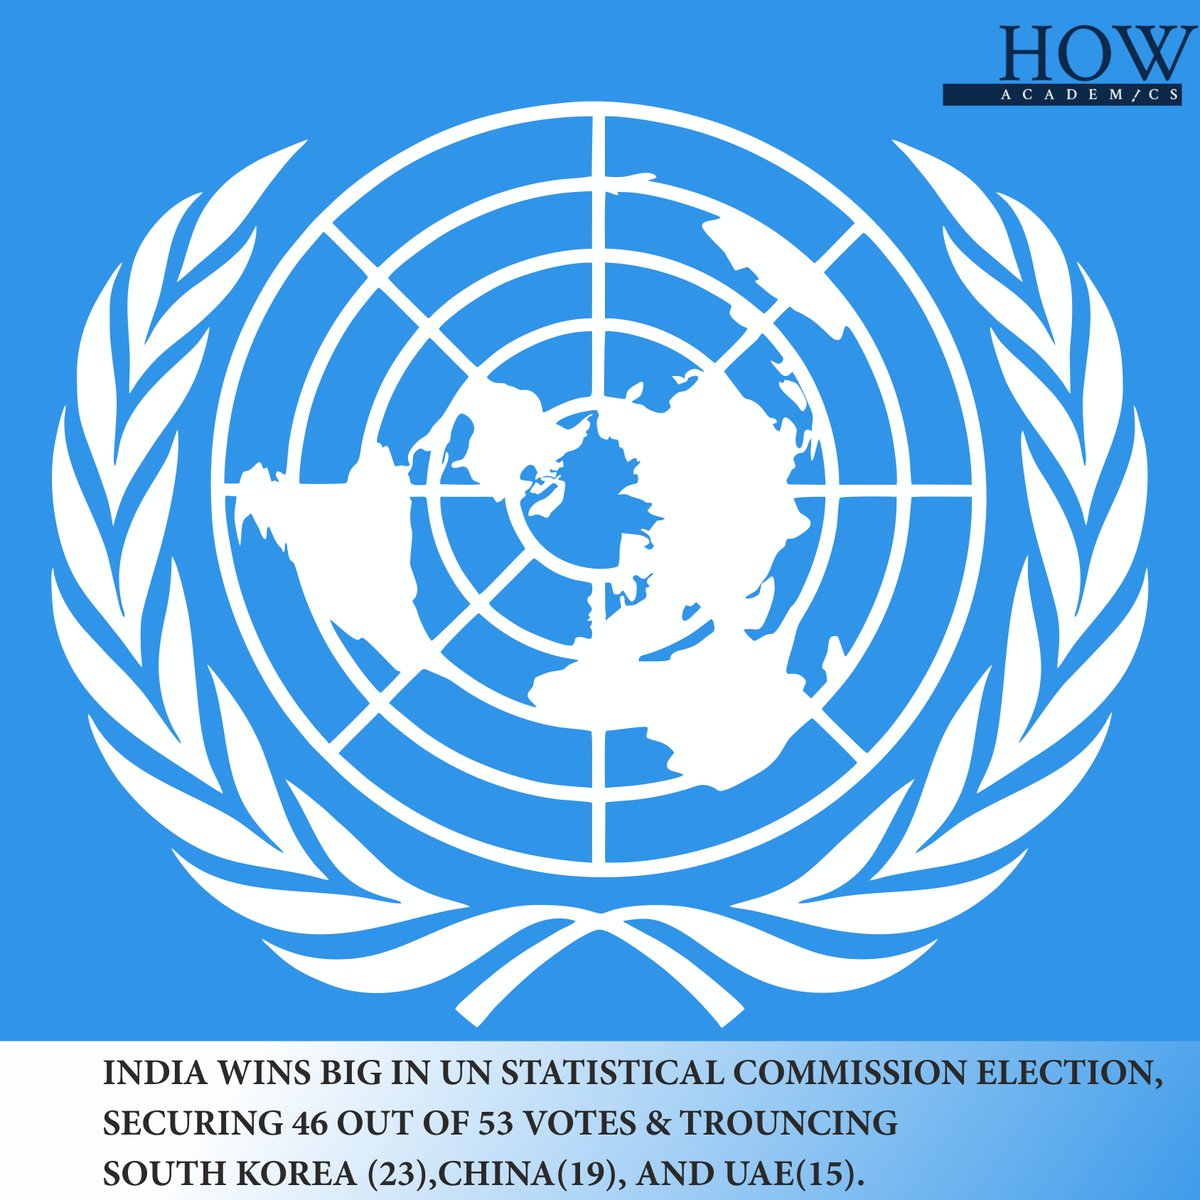 In a significant victory, India has been elected to the UN Statistical Commission for a four-year period in a 'competitive' election. #IndiaUNStatComm #UNStatCommission #IndiaAtUN #GlobalStatistics #UNSDGs #IndiaProgress #DataForDevelopment #UNVotes #IndiaInUN 🇮🇳🇮🇳🇺🇳🇺🇳